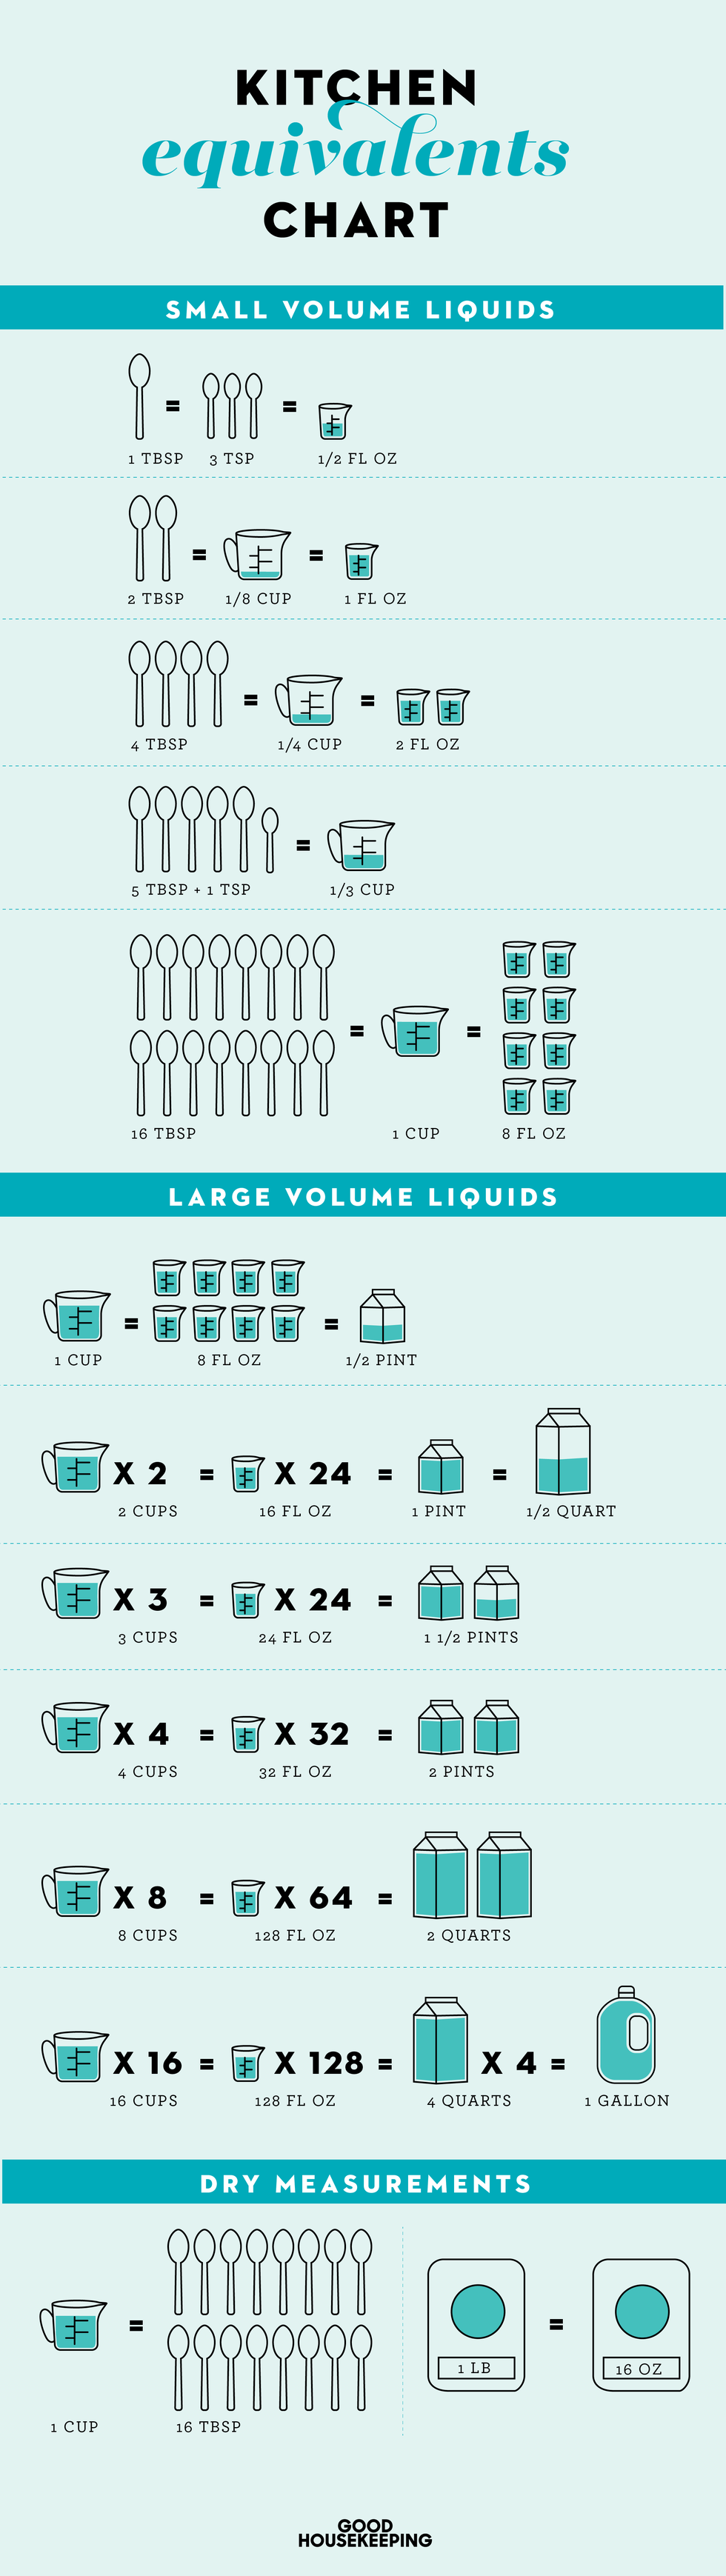 How Many Teaspoons In A Tablespoon? (+ Conversion Guide!)